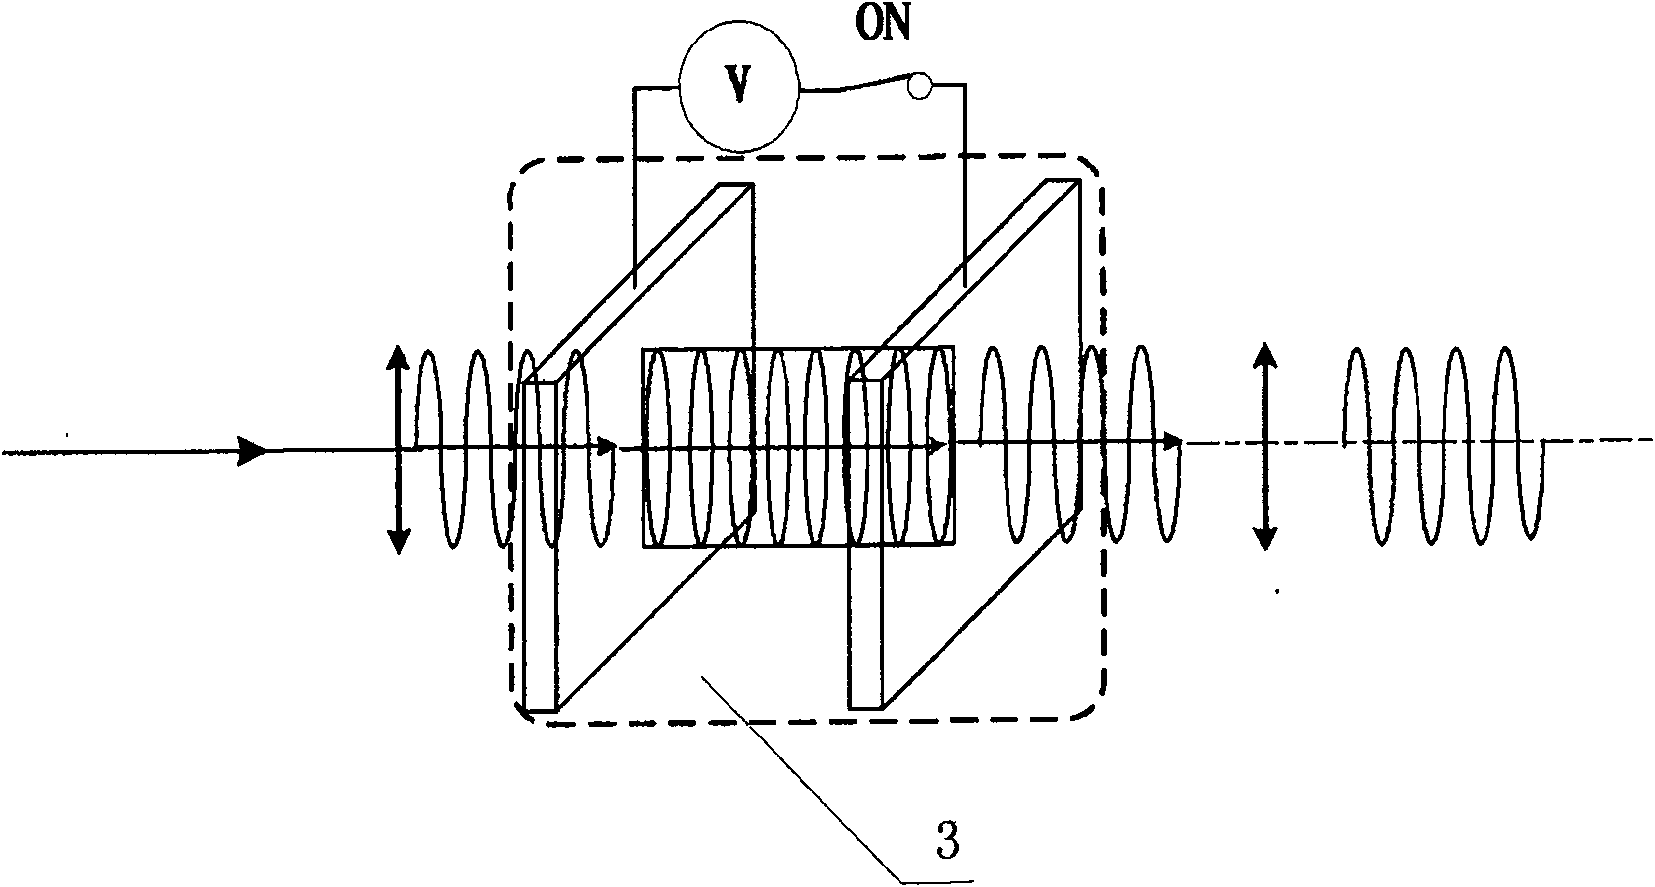 Embedded type polarization state measuring instrument based on LCD